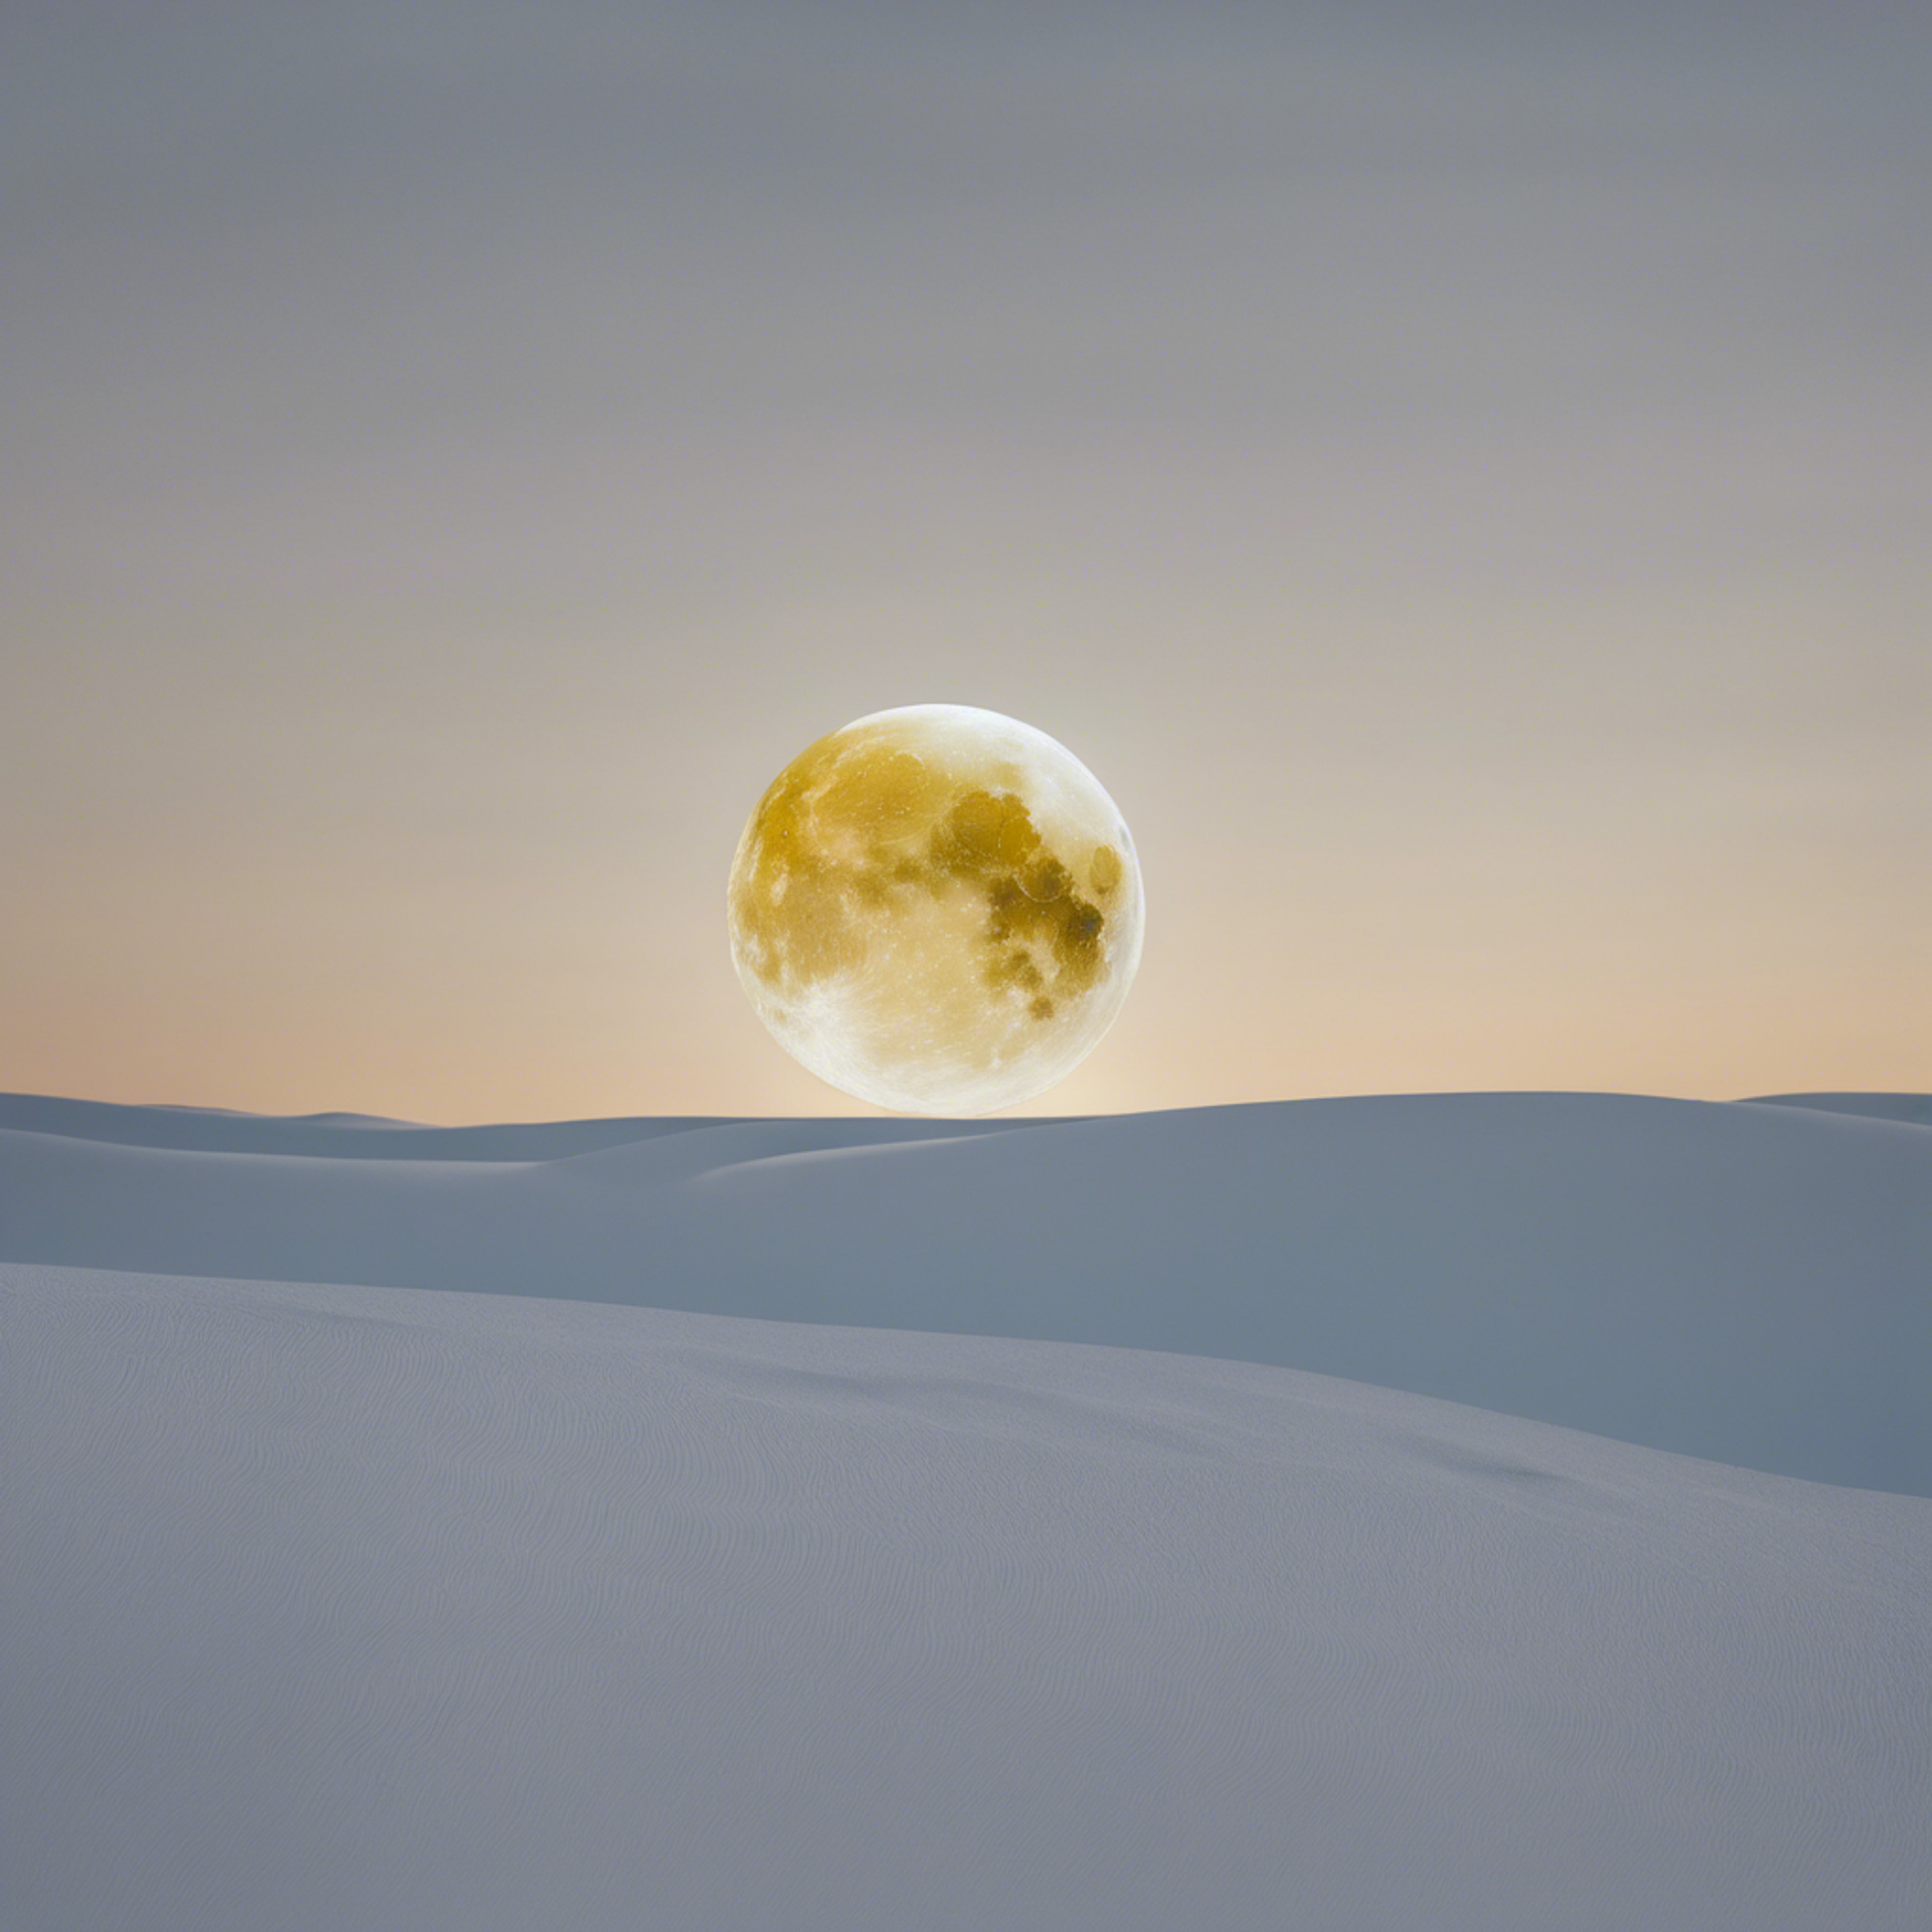 A radiant full moon casting a subtle yellow glow over a calm white desert. Tapeta[140acfbb6335412b878f]